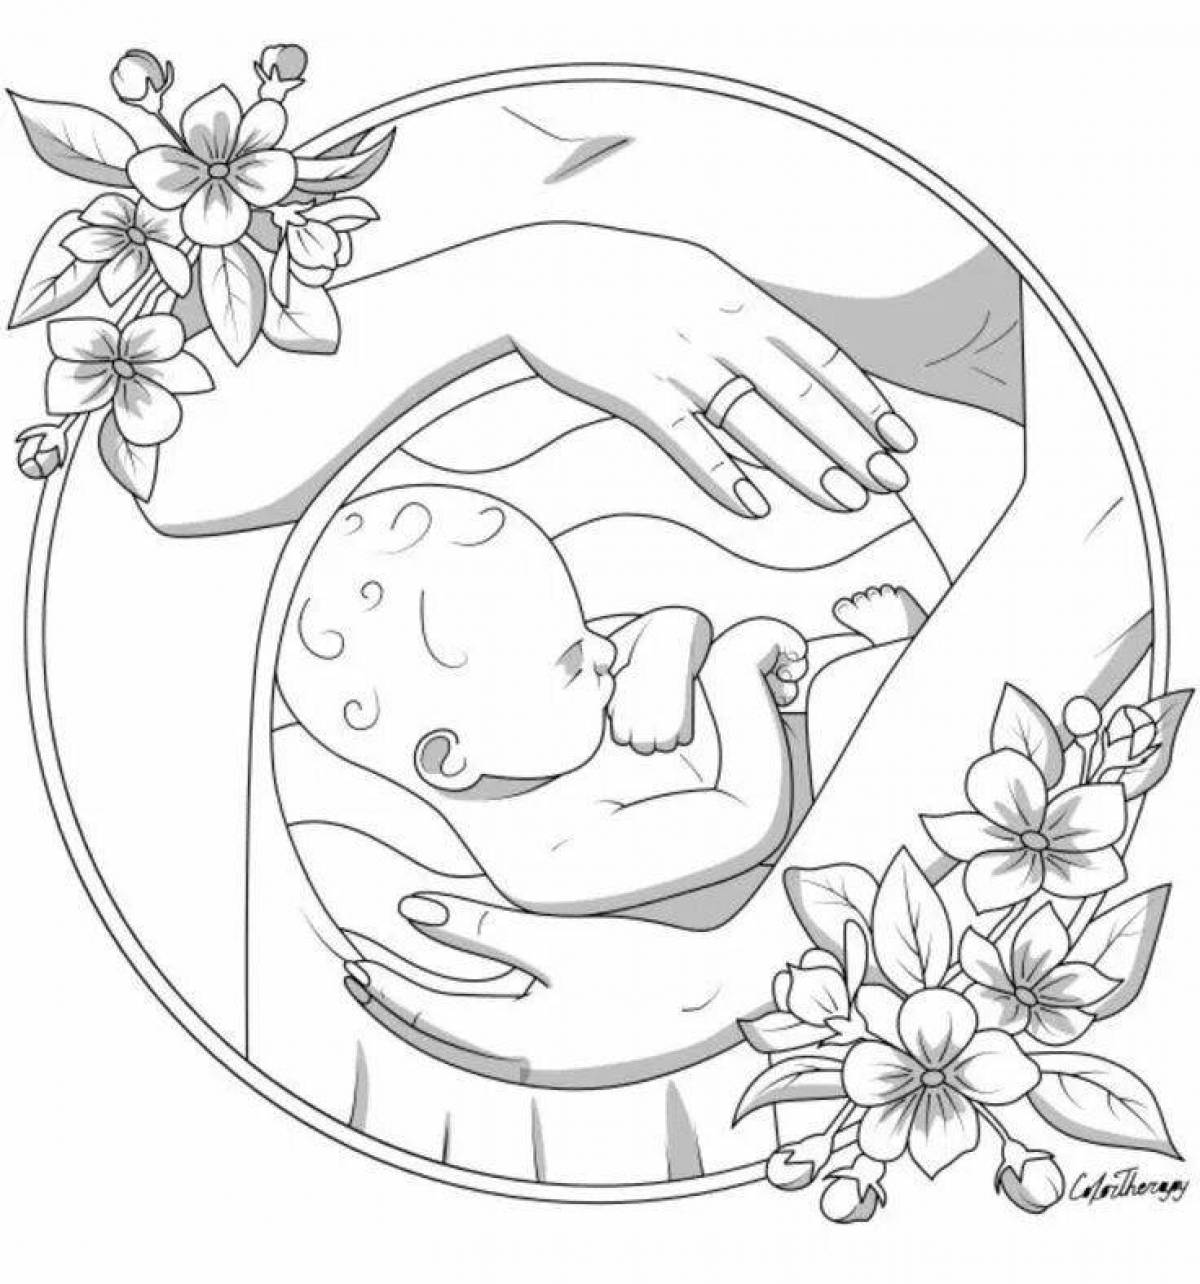 Coloring book for pregnant women antistress